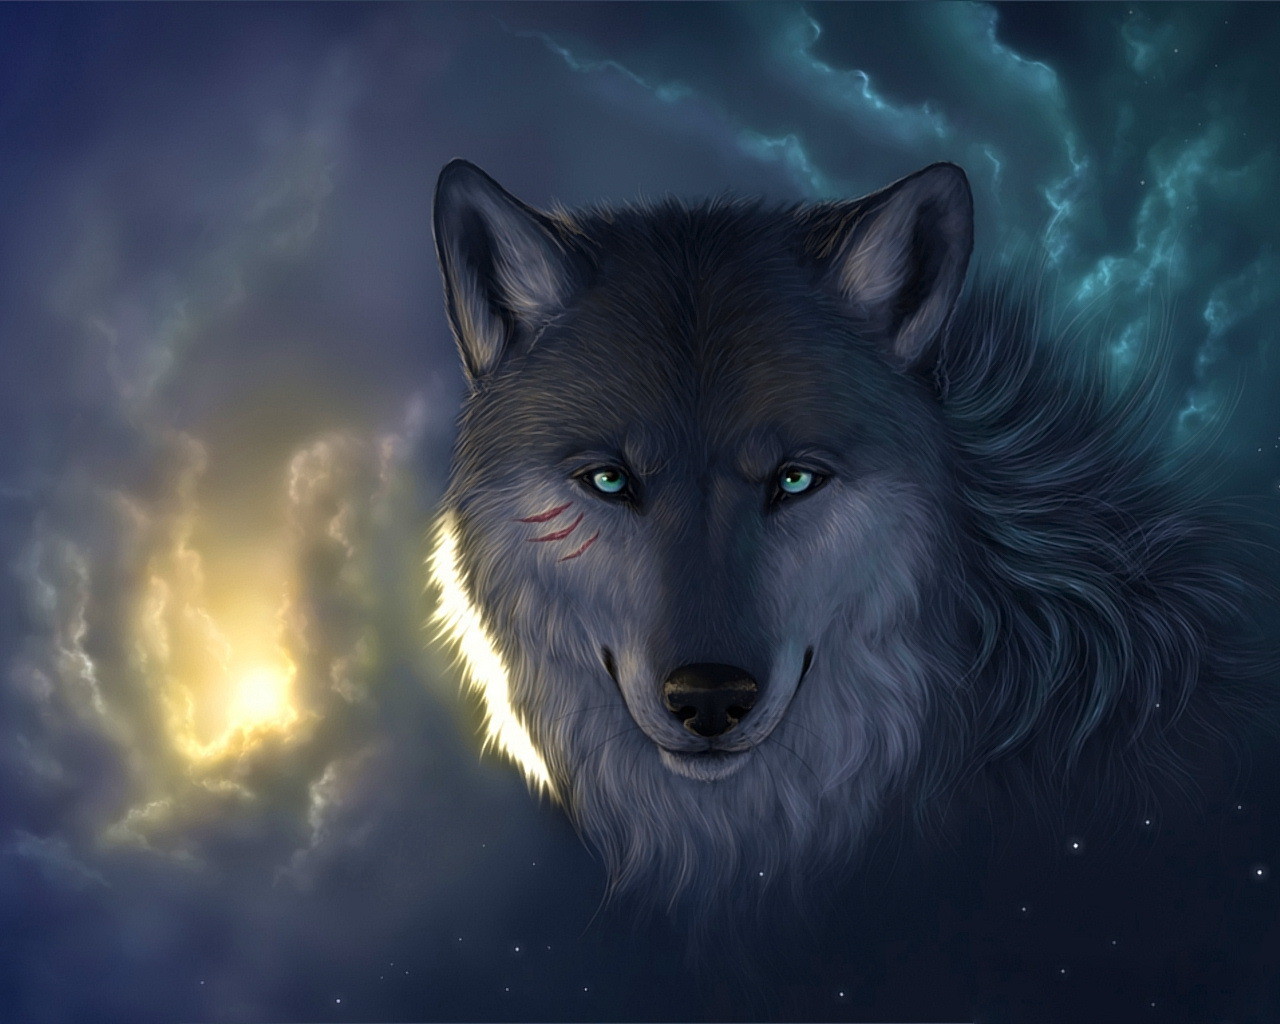 Illustrated wolf desktop wallpaper pictures Illustrated wolf